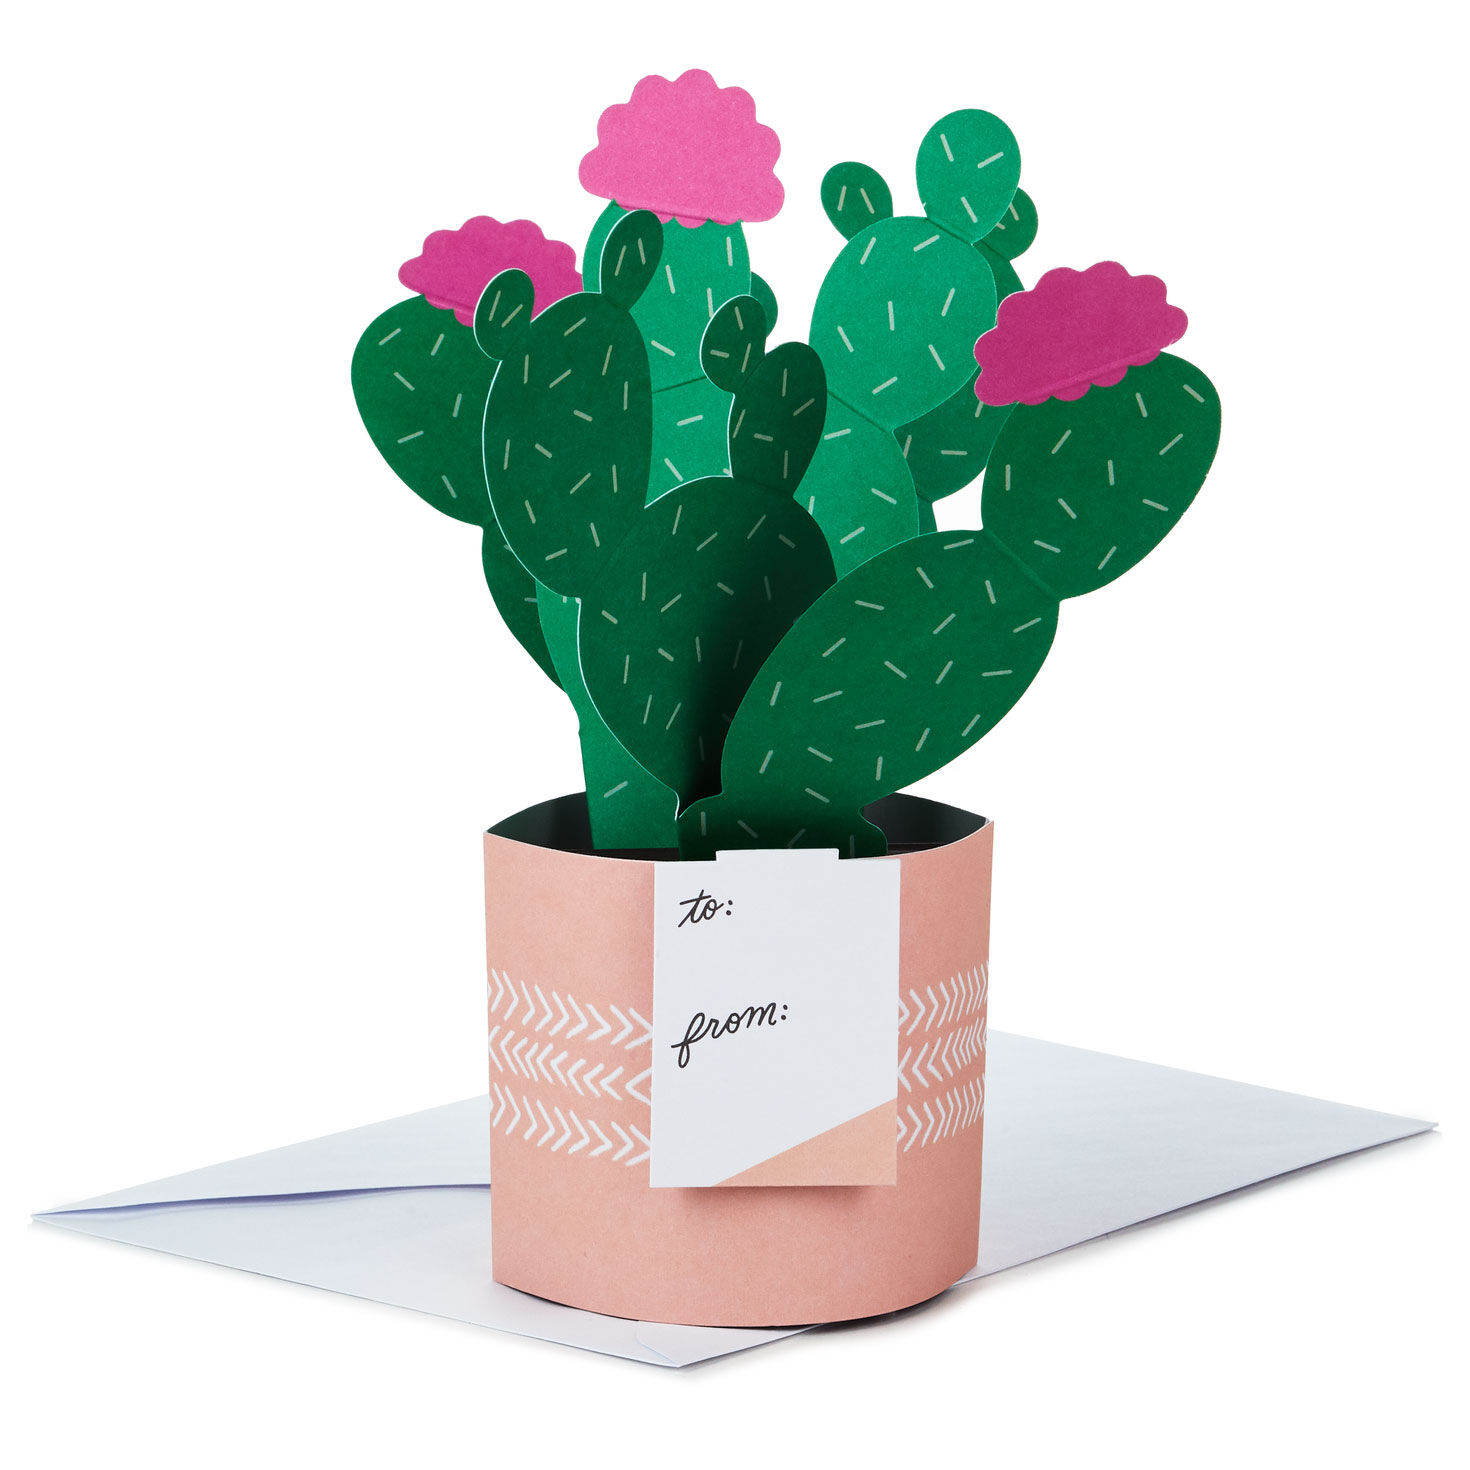 Cactus Looking Sharp 3D Pop-Up Card for only USD 6.99 | Hallmark